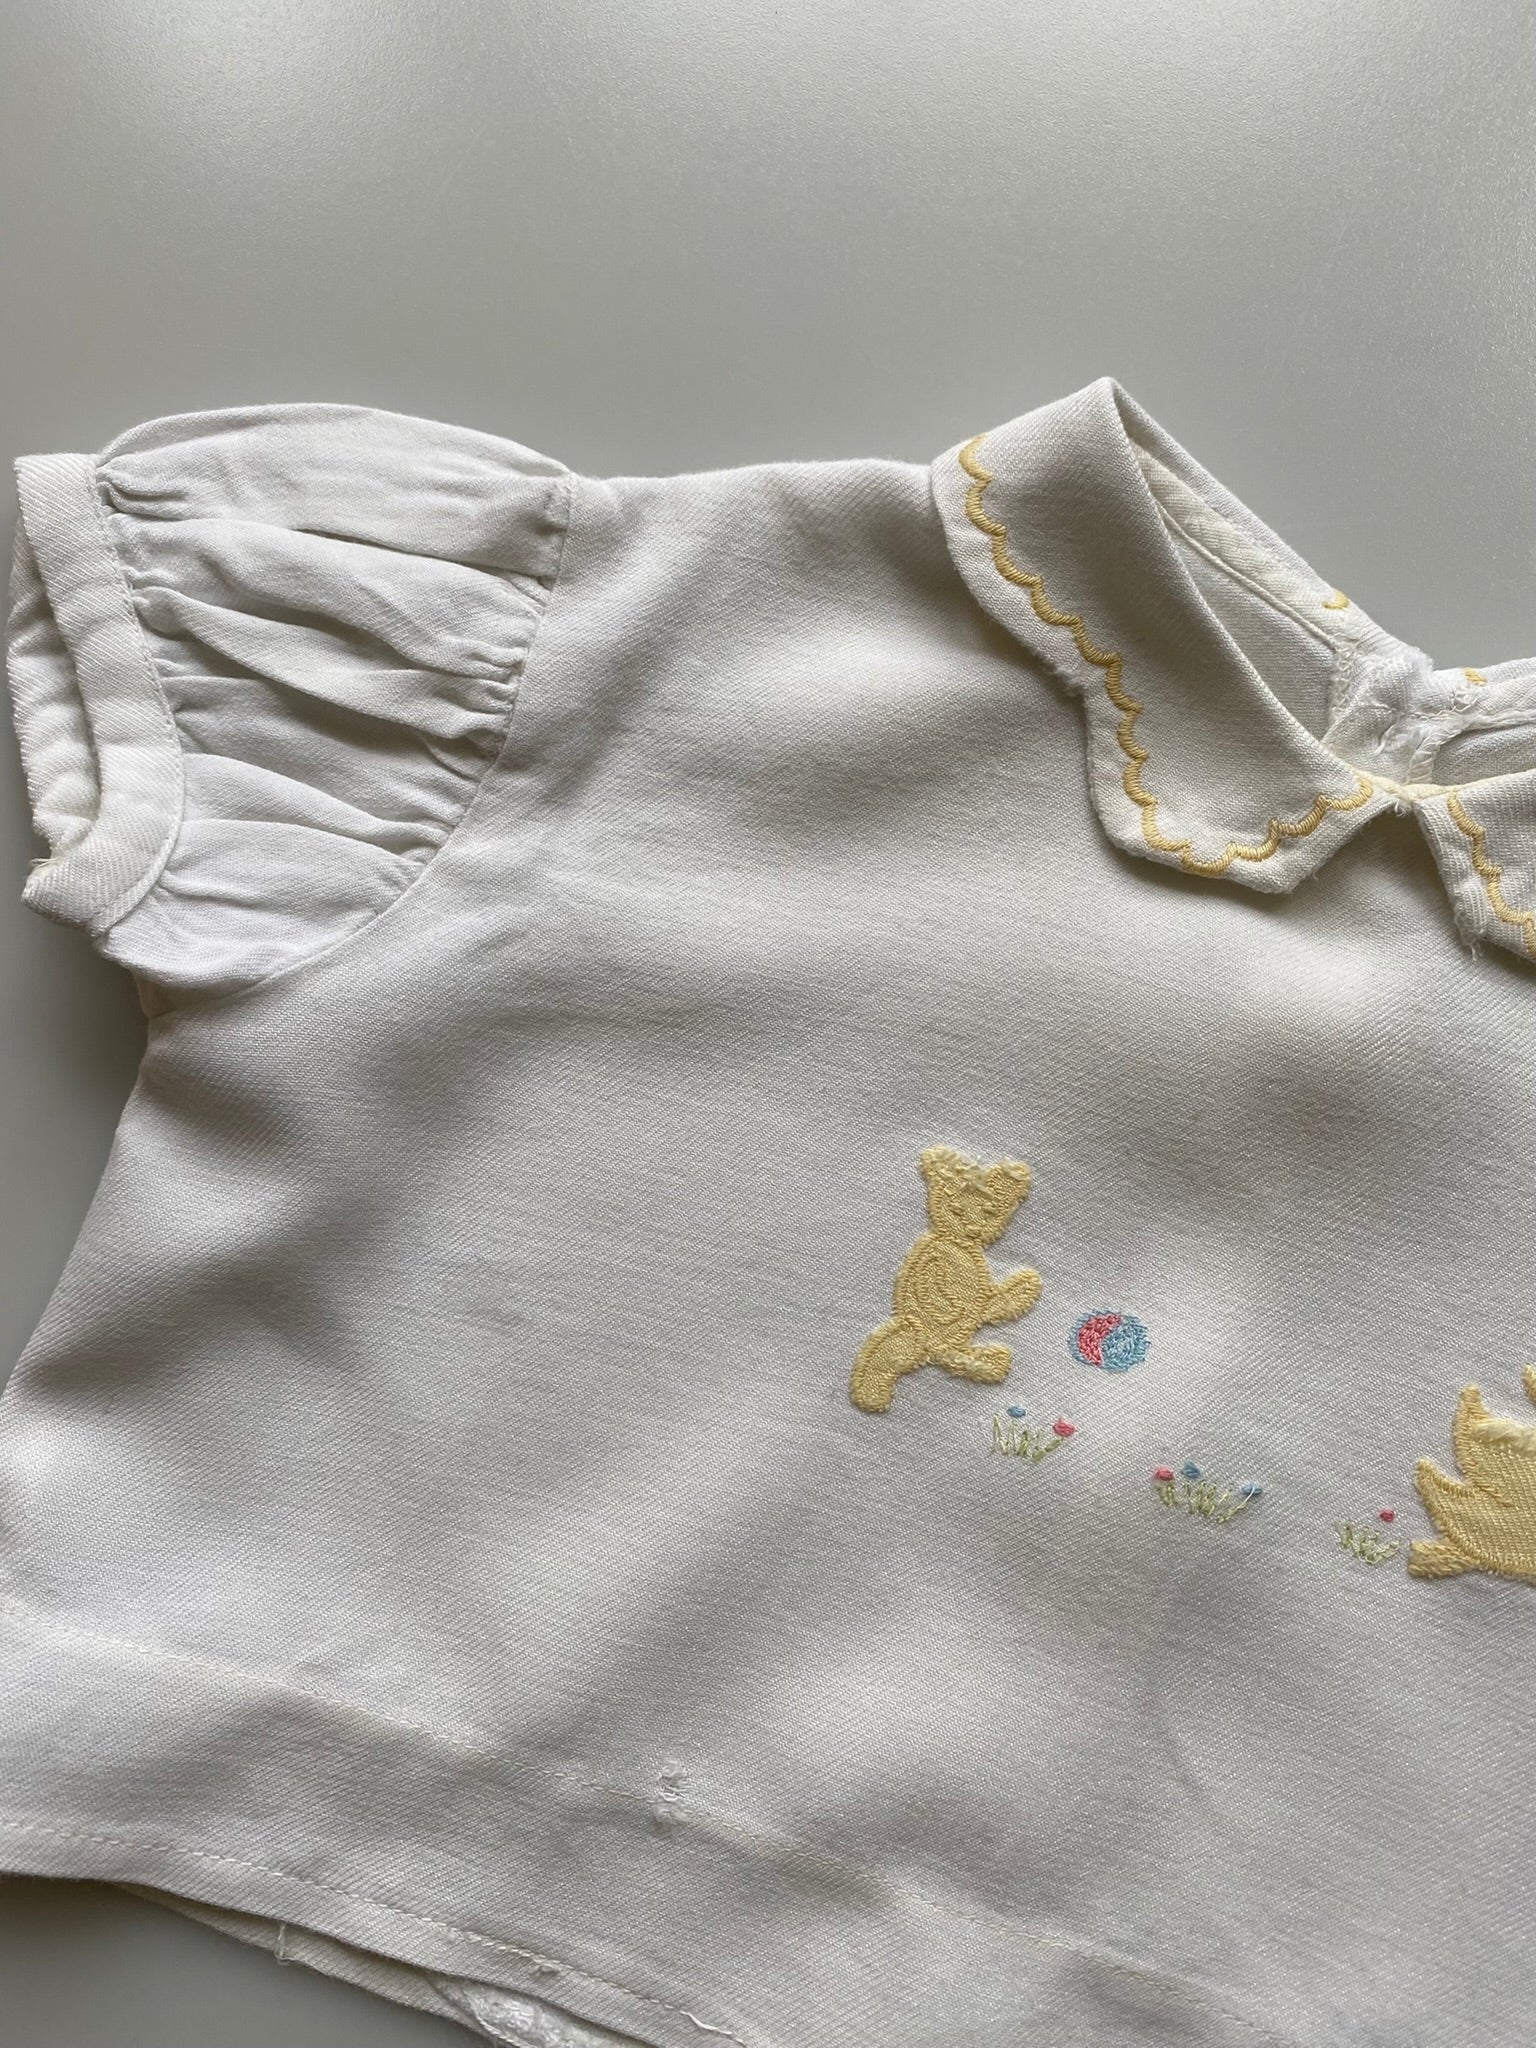 Vintage Embroidered Blouse With Scalloped Neck 0-3 Months